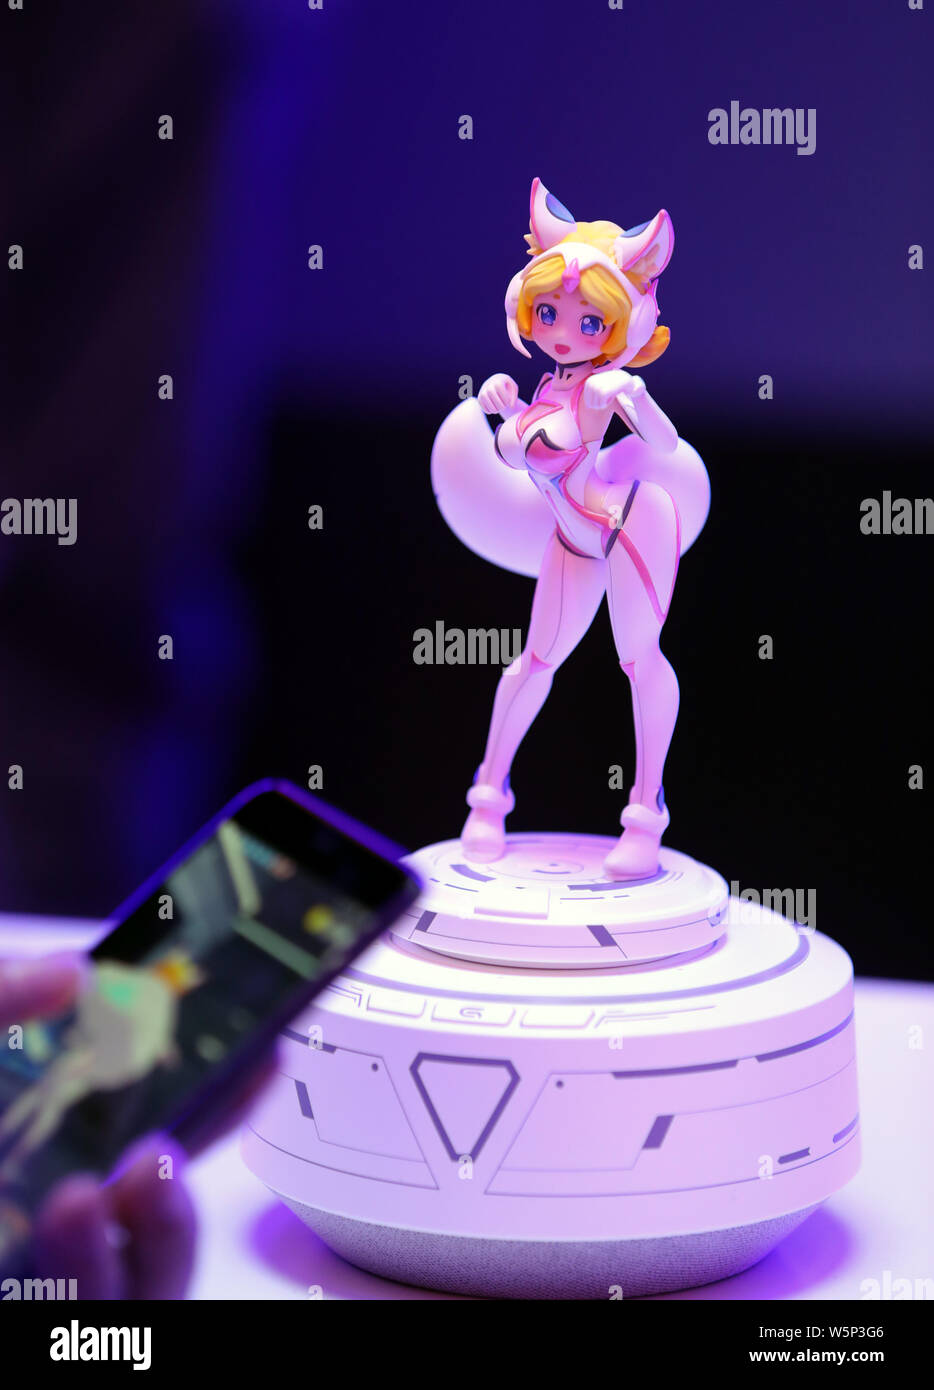 A smart robot TaiQ featuring "Daji" of Tencent's mobile MOBA "King of Glory"  or "Honor of Kings" is displayed during the Tencent Global Digital Ecosys  Stock Photo - Alamy